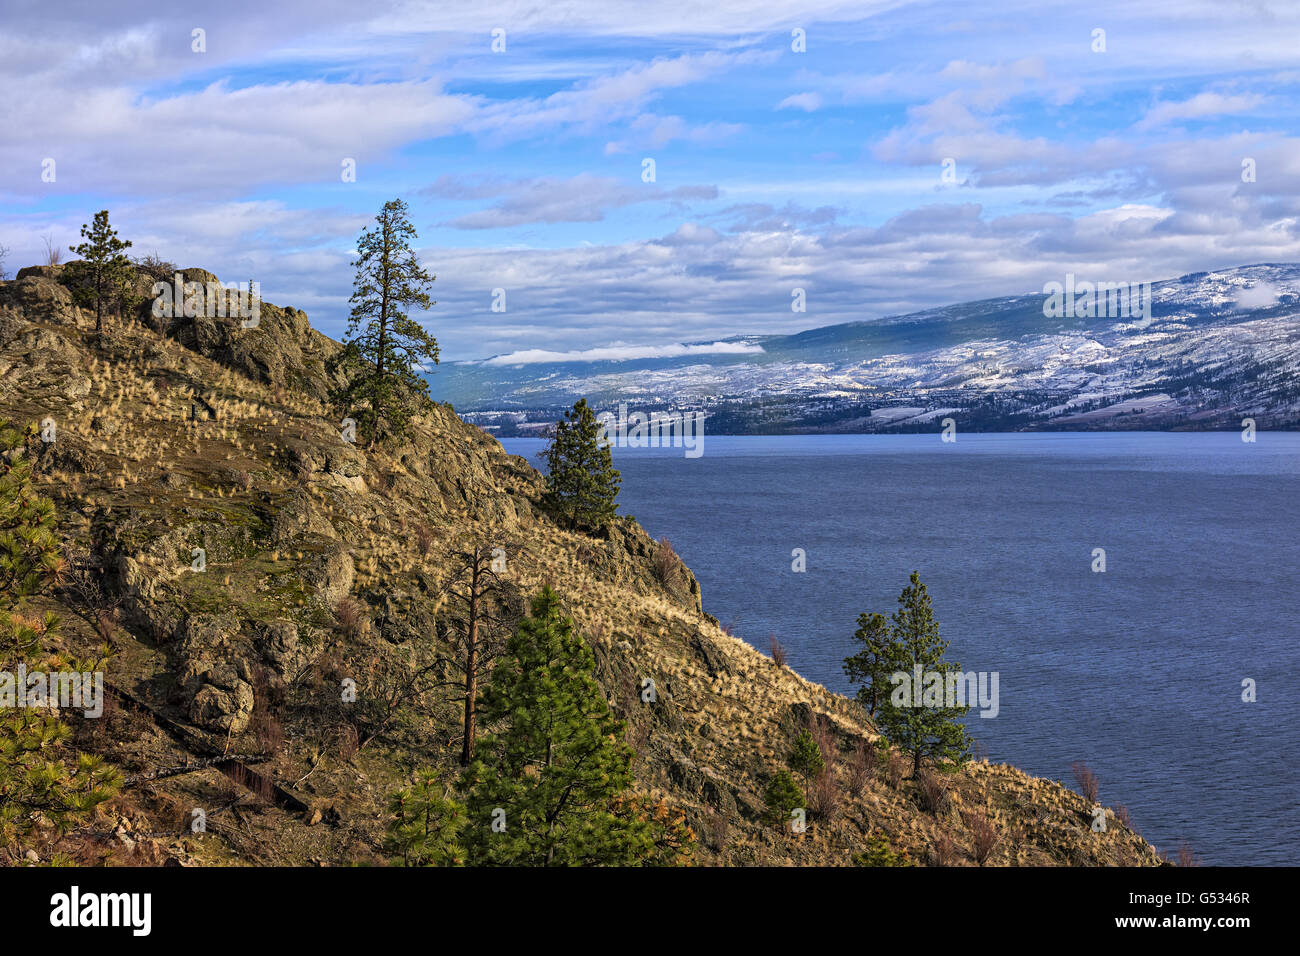 Okanagan Lake Kelowna British Columbia Canada in the winter with snowy mountains in the background Stock Photo